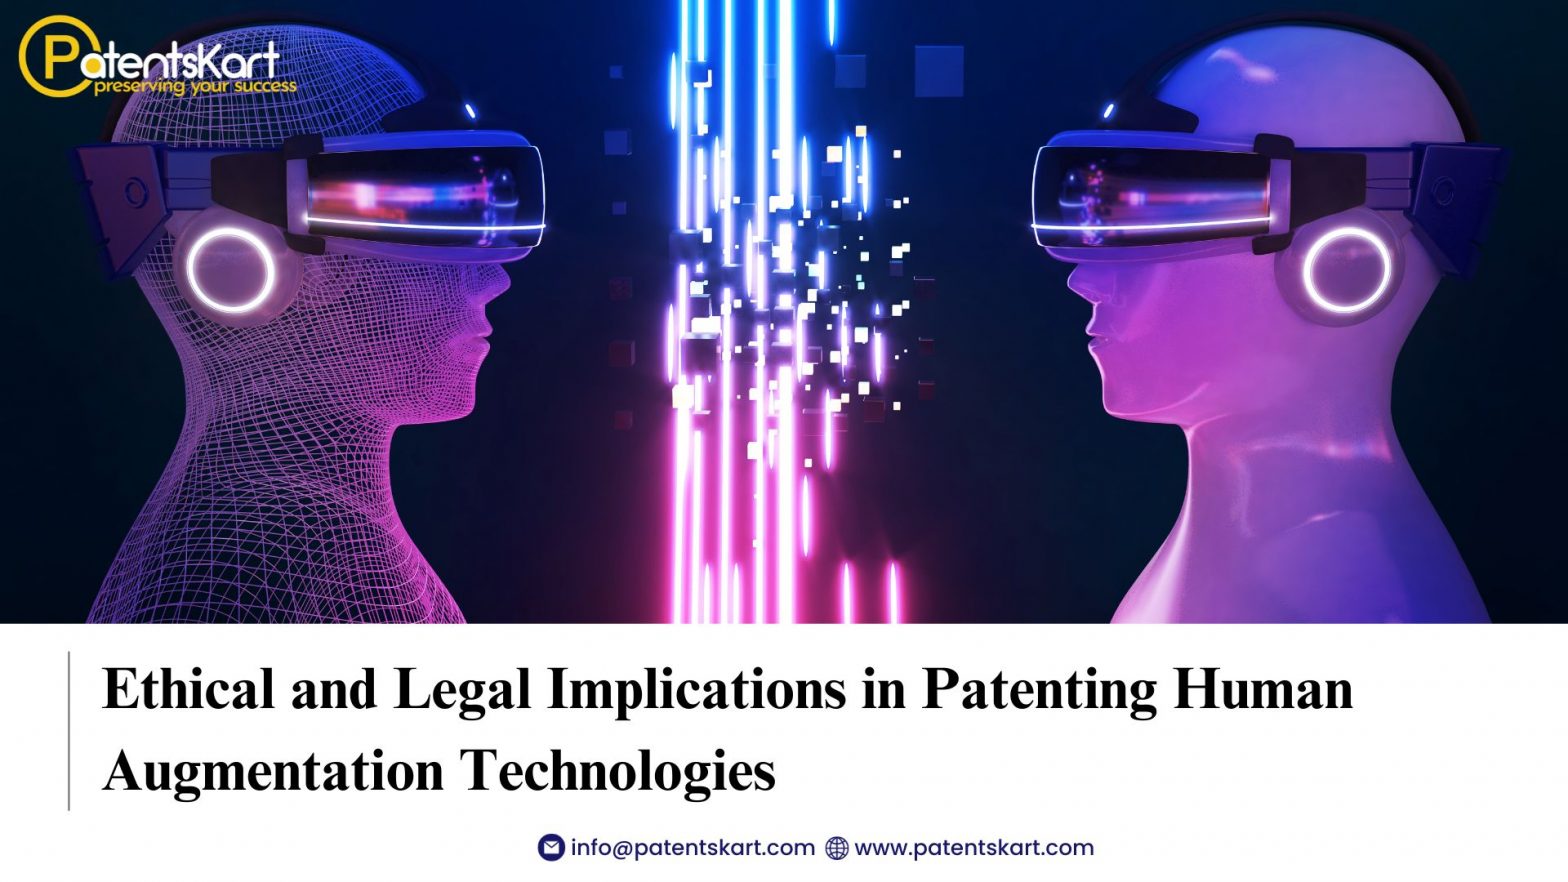 Ethical and Legal Implications in Patenting Human Augmentation Technologies